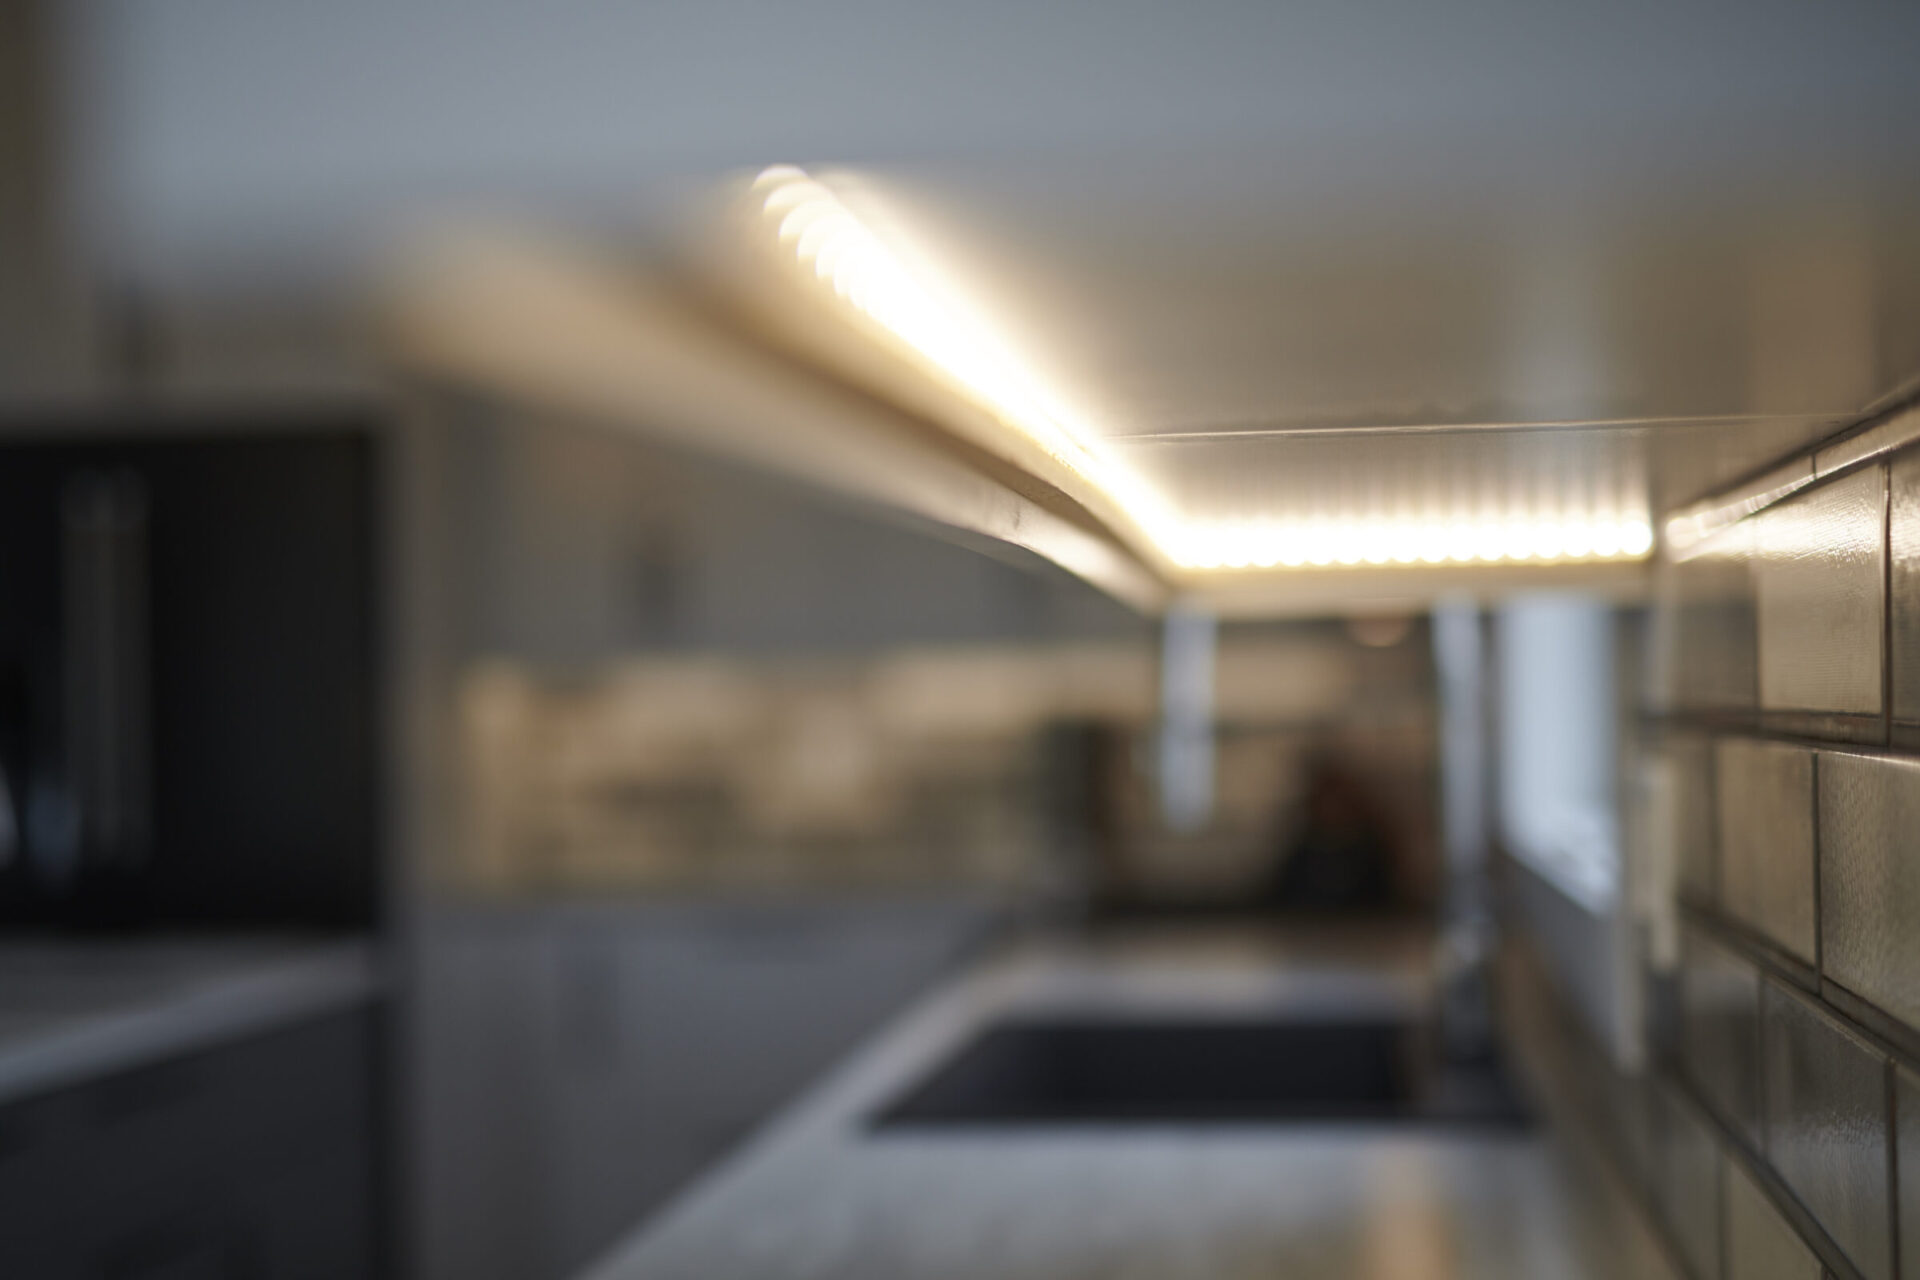 This image shows an out-of-focus interior, possibly a kitchen, with a clear focus on a lit, elongated LED light fixture against a tiled wall.